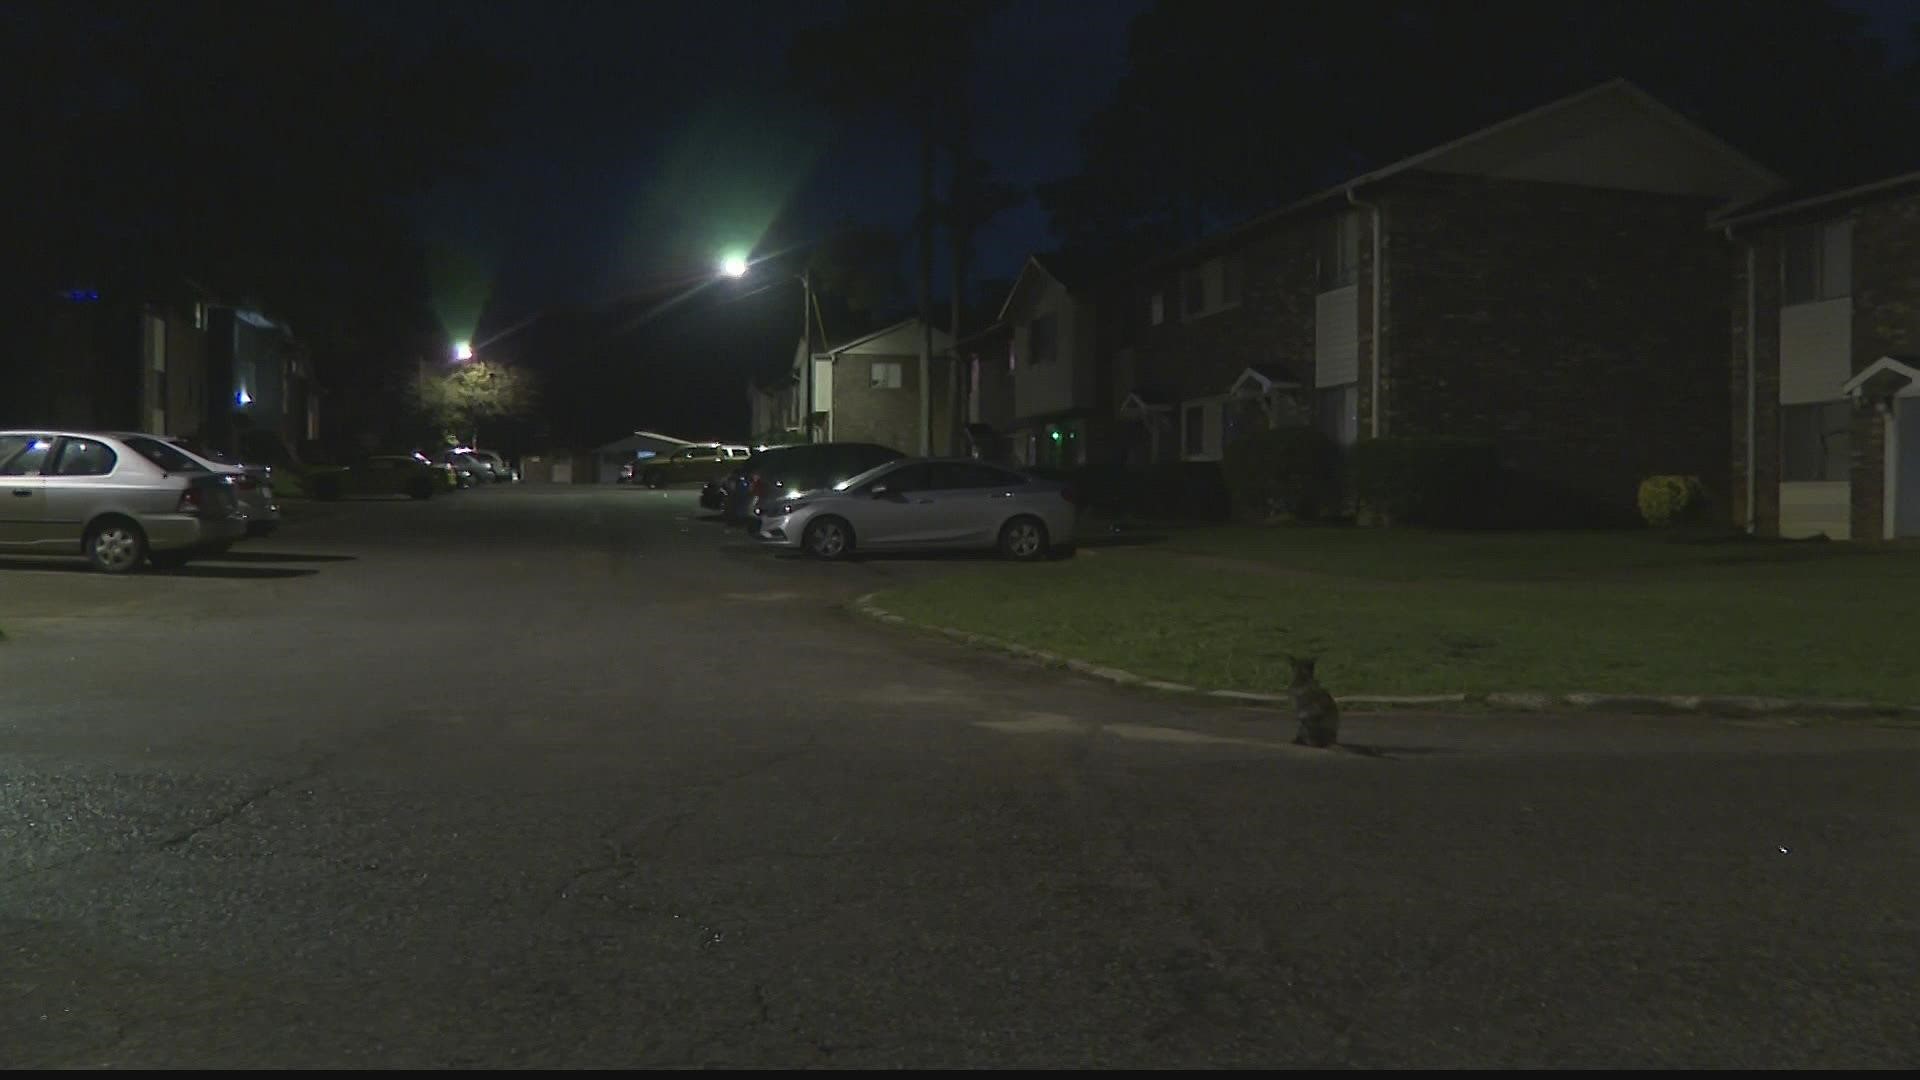 DeKalb County police are not sure who fired the gun from outside her apartment and said the investigation is ongoing.